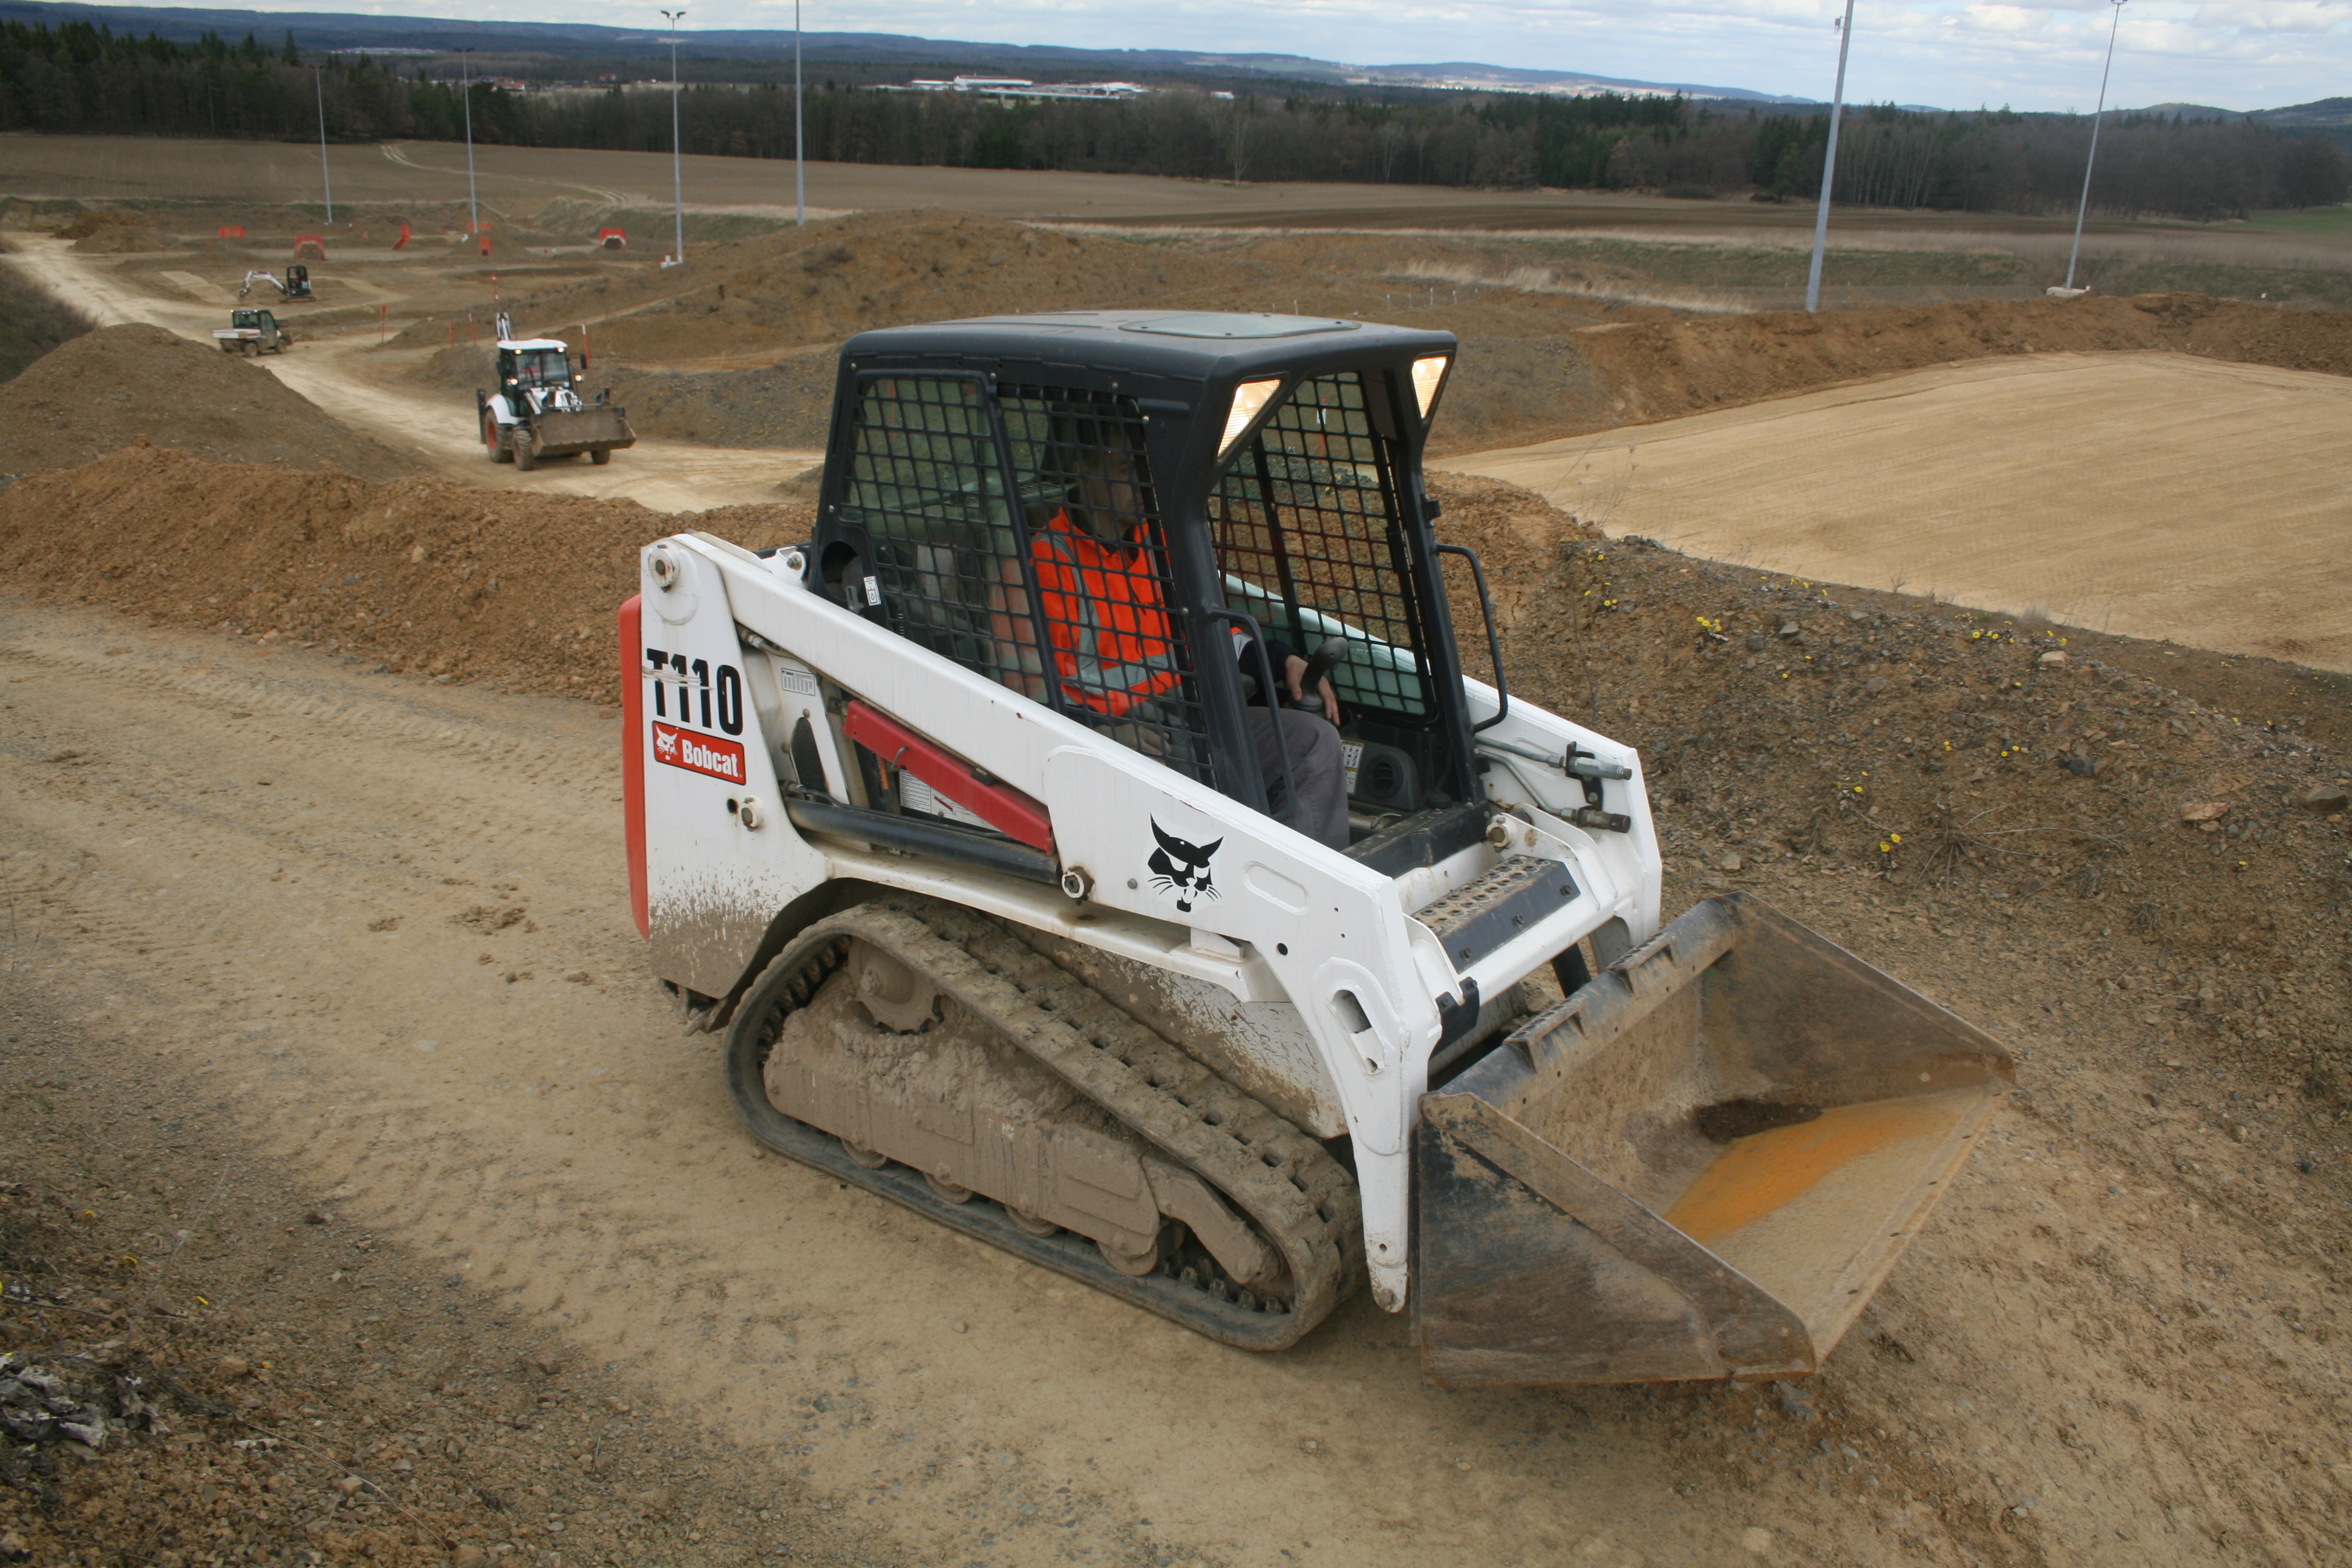 Bobcat Ups Advantages with New Innovation Center Investments